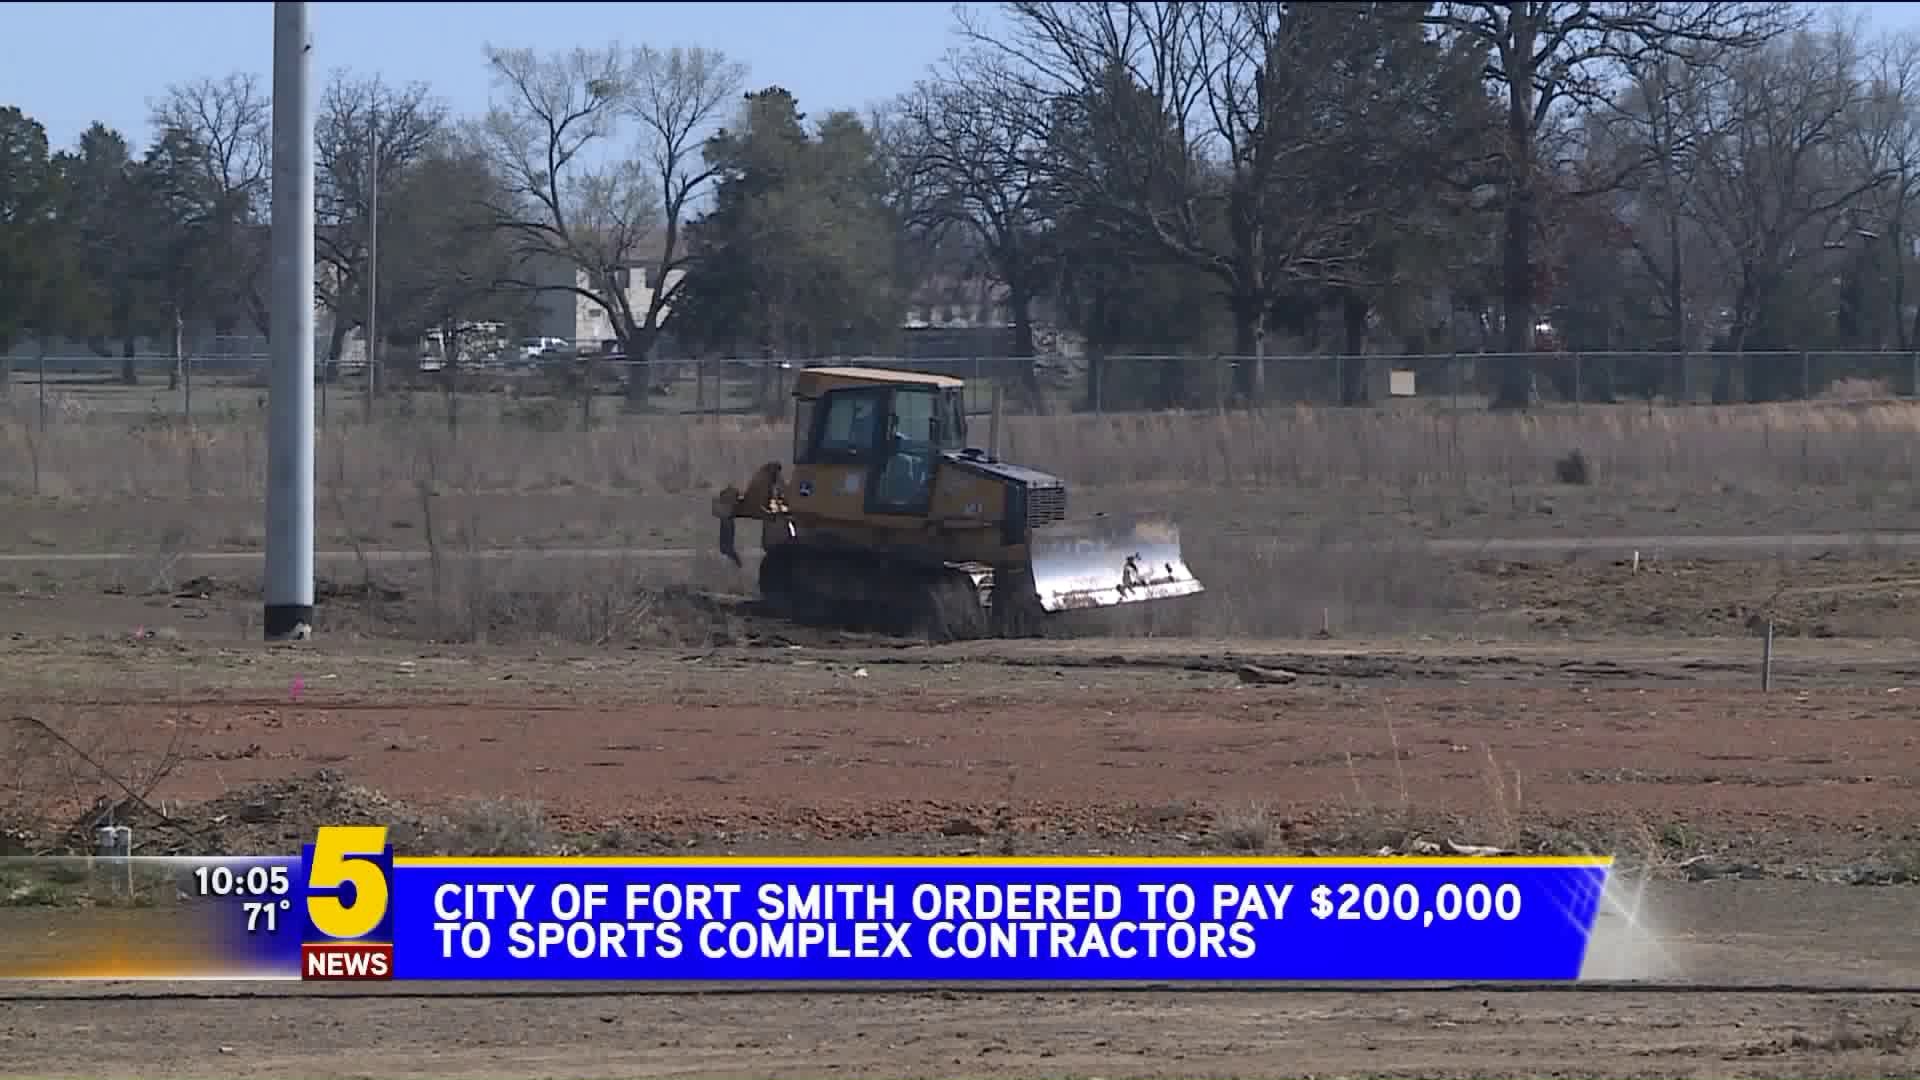 City Of Fort Smith Ordered To Pay $200,000 To Sports Complex Contractors